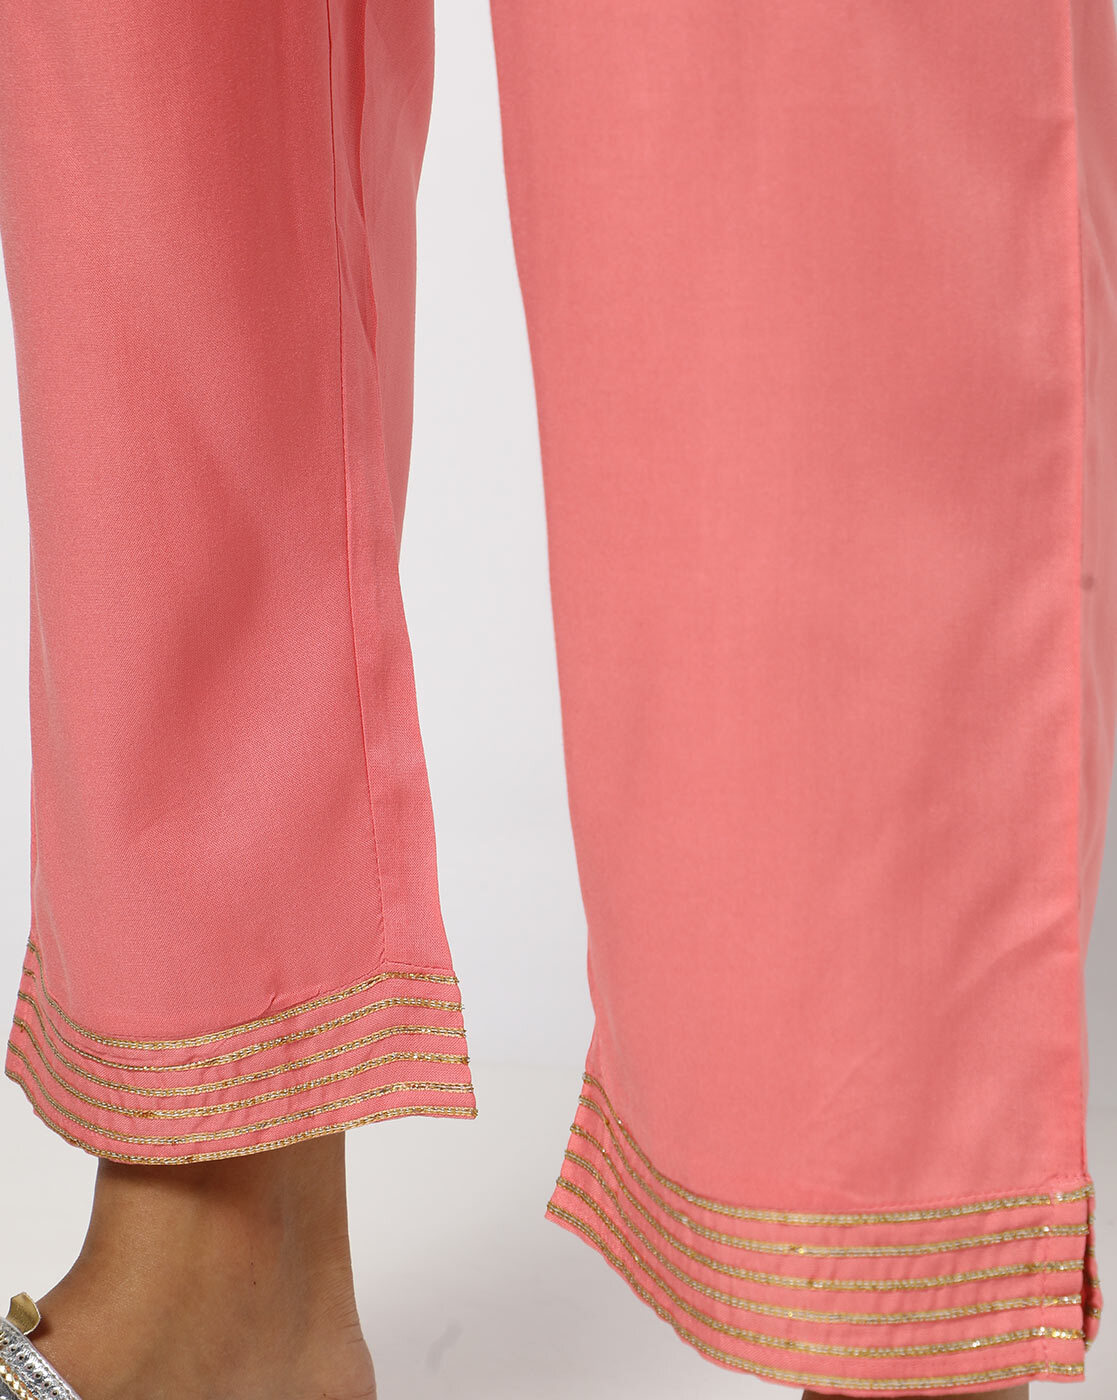 Buy Pink Pants for Women by AVAASA MIX N' MATCH Online